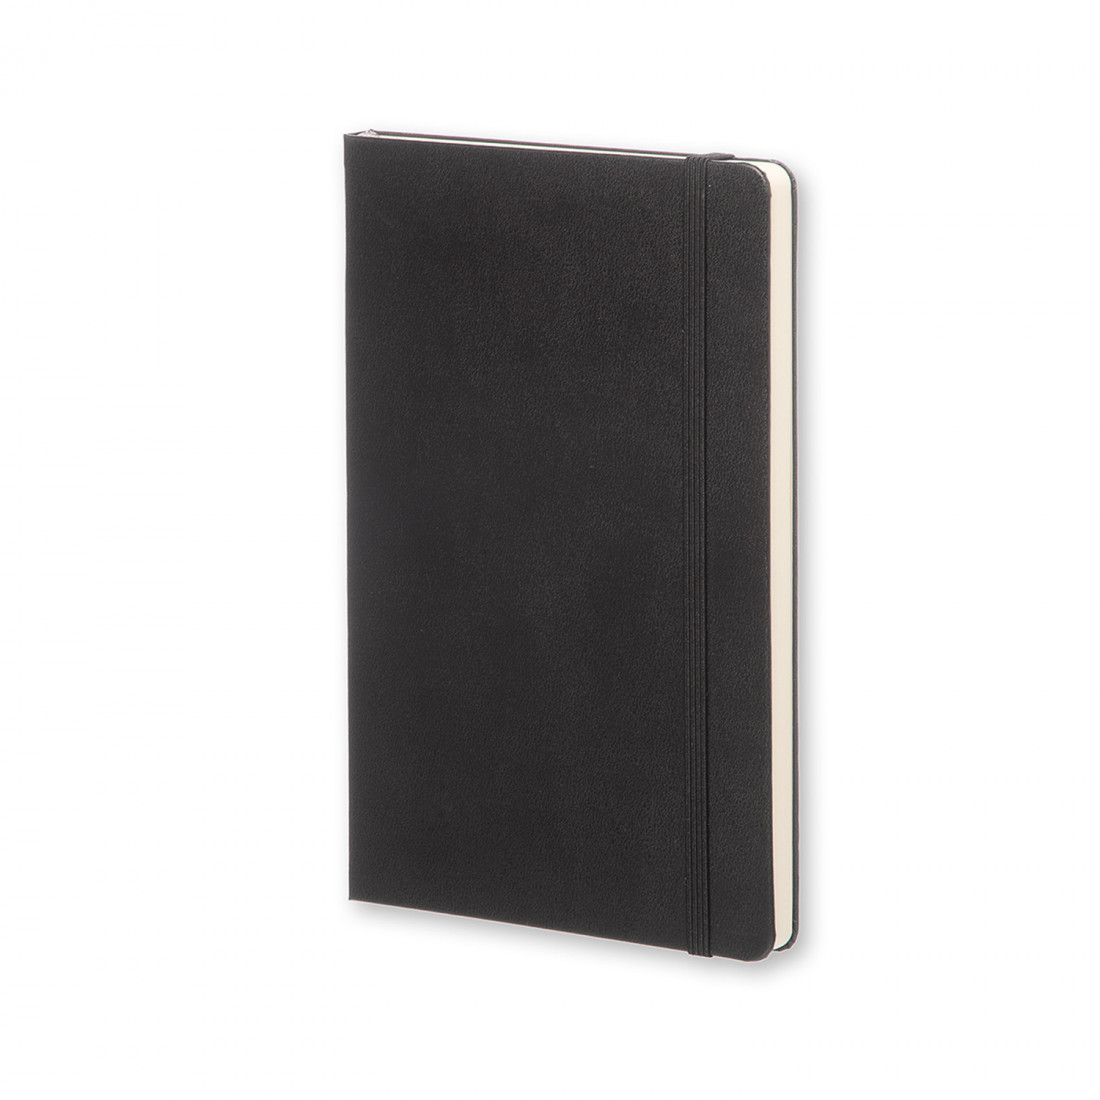 Notebook Large 13x21 Dotted Black Hard Cover Moleskine